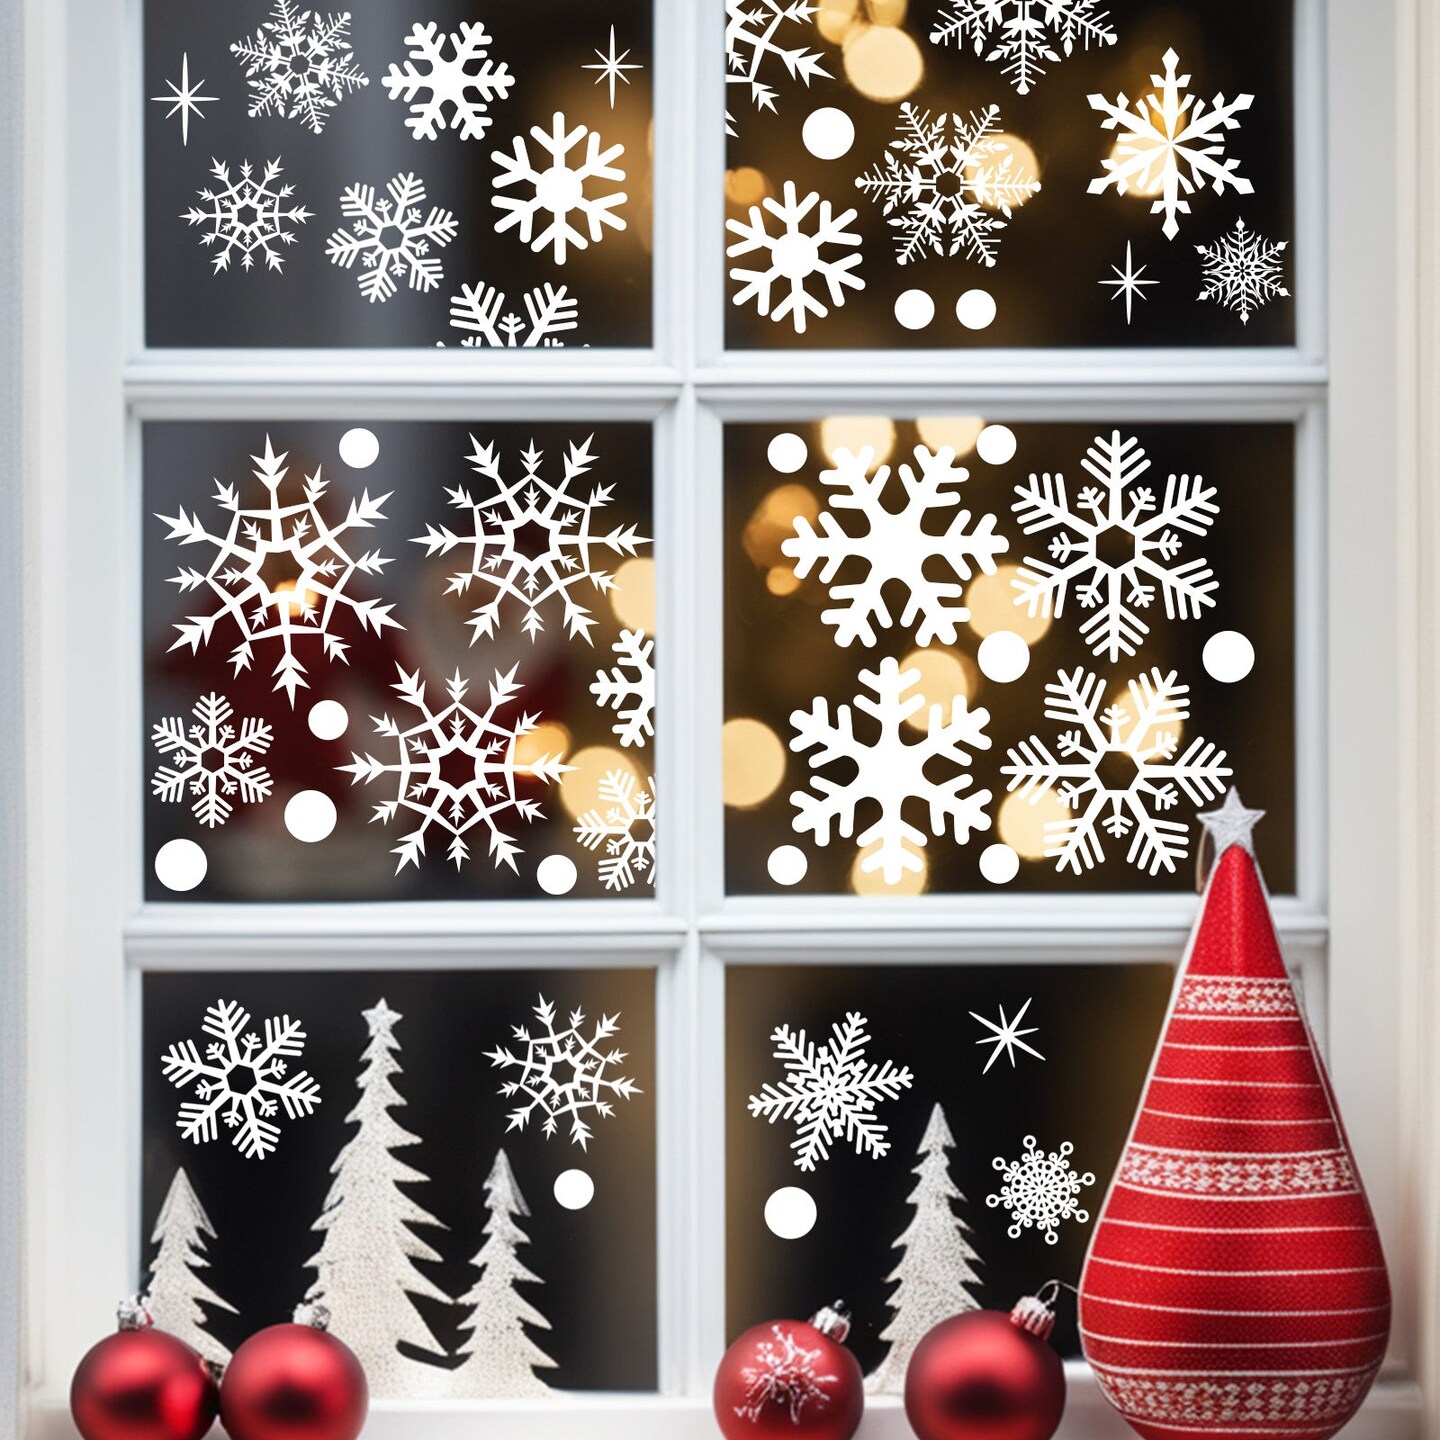 Wrapables Snowflake Window Clings Decal Stickers, Christmas Winter Decoration for Glass Windows 9pc Starry